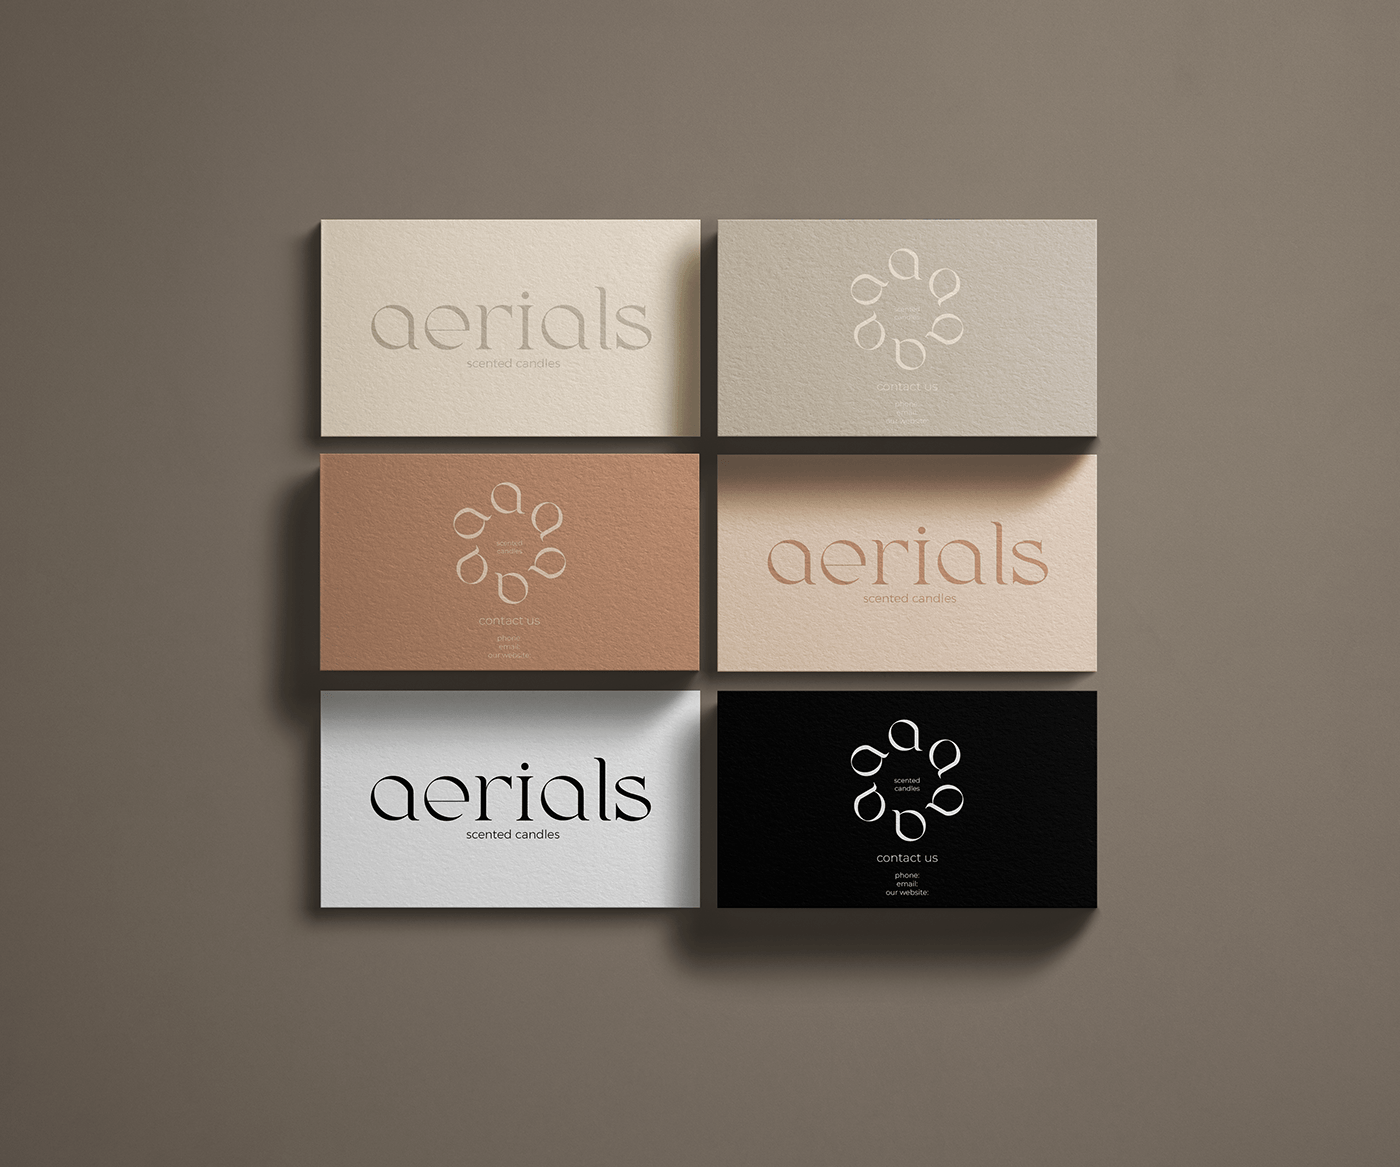 graphic design  Logotype Packaging candles identity branding  brand identity logo package design  Brand Design